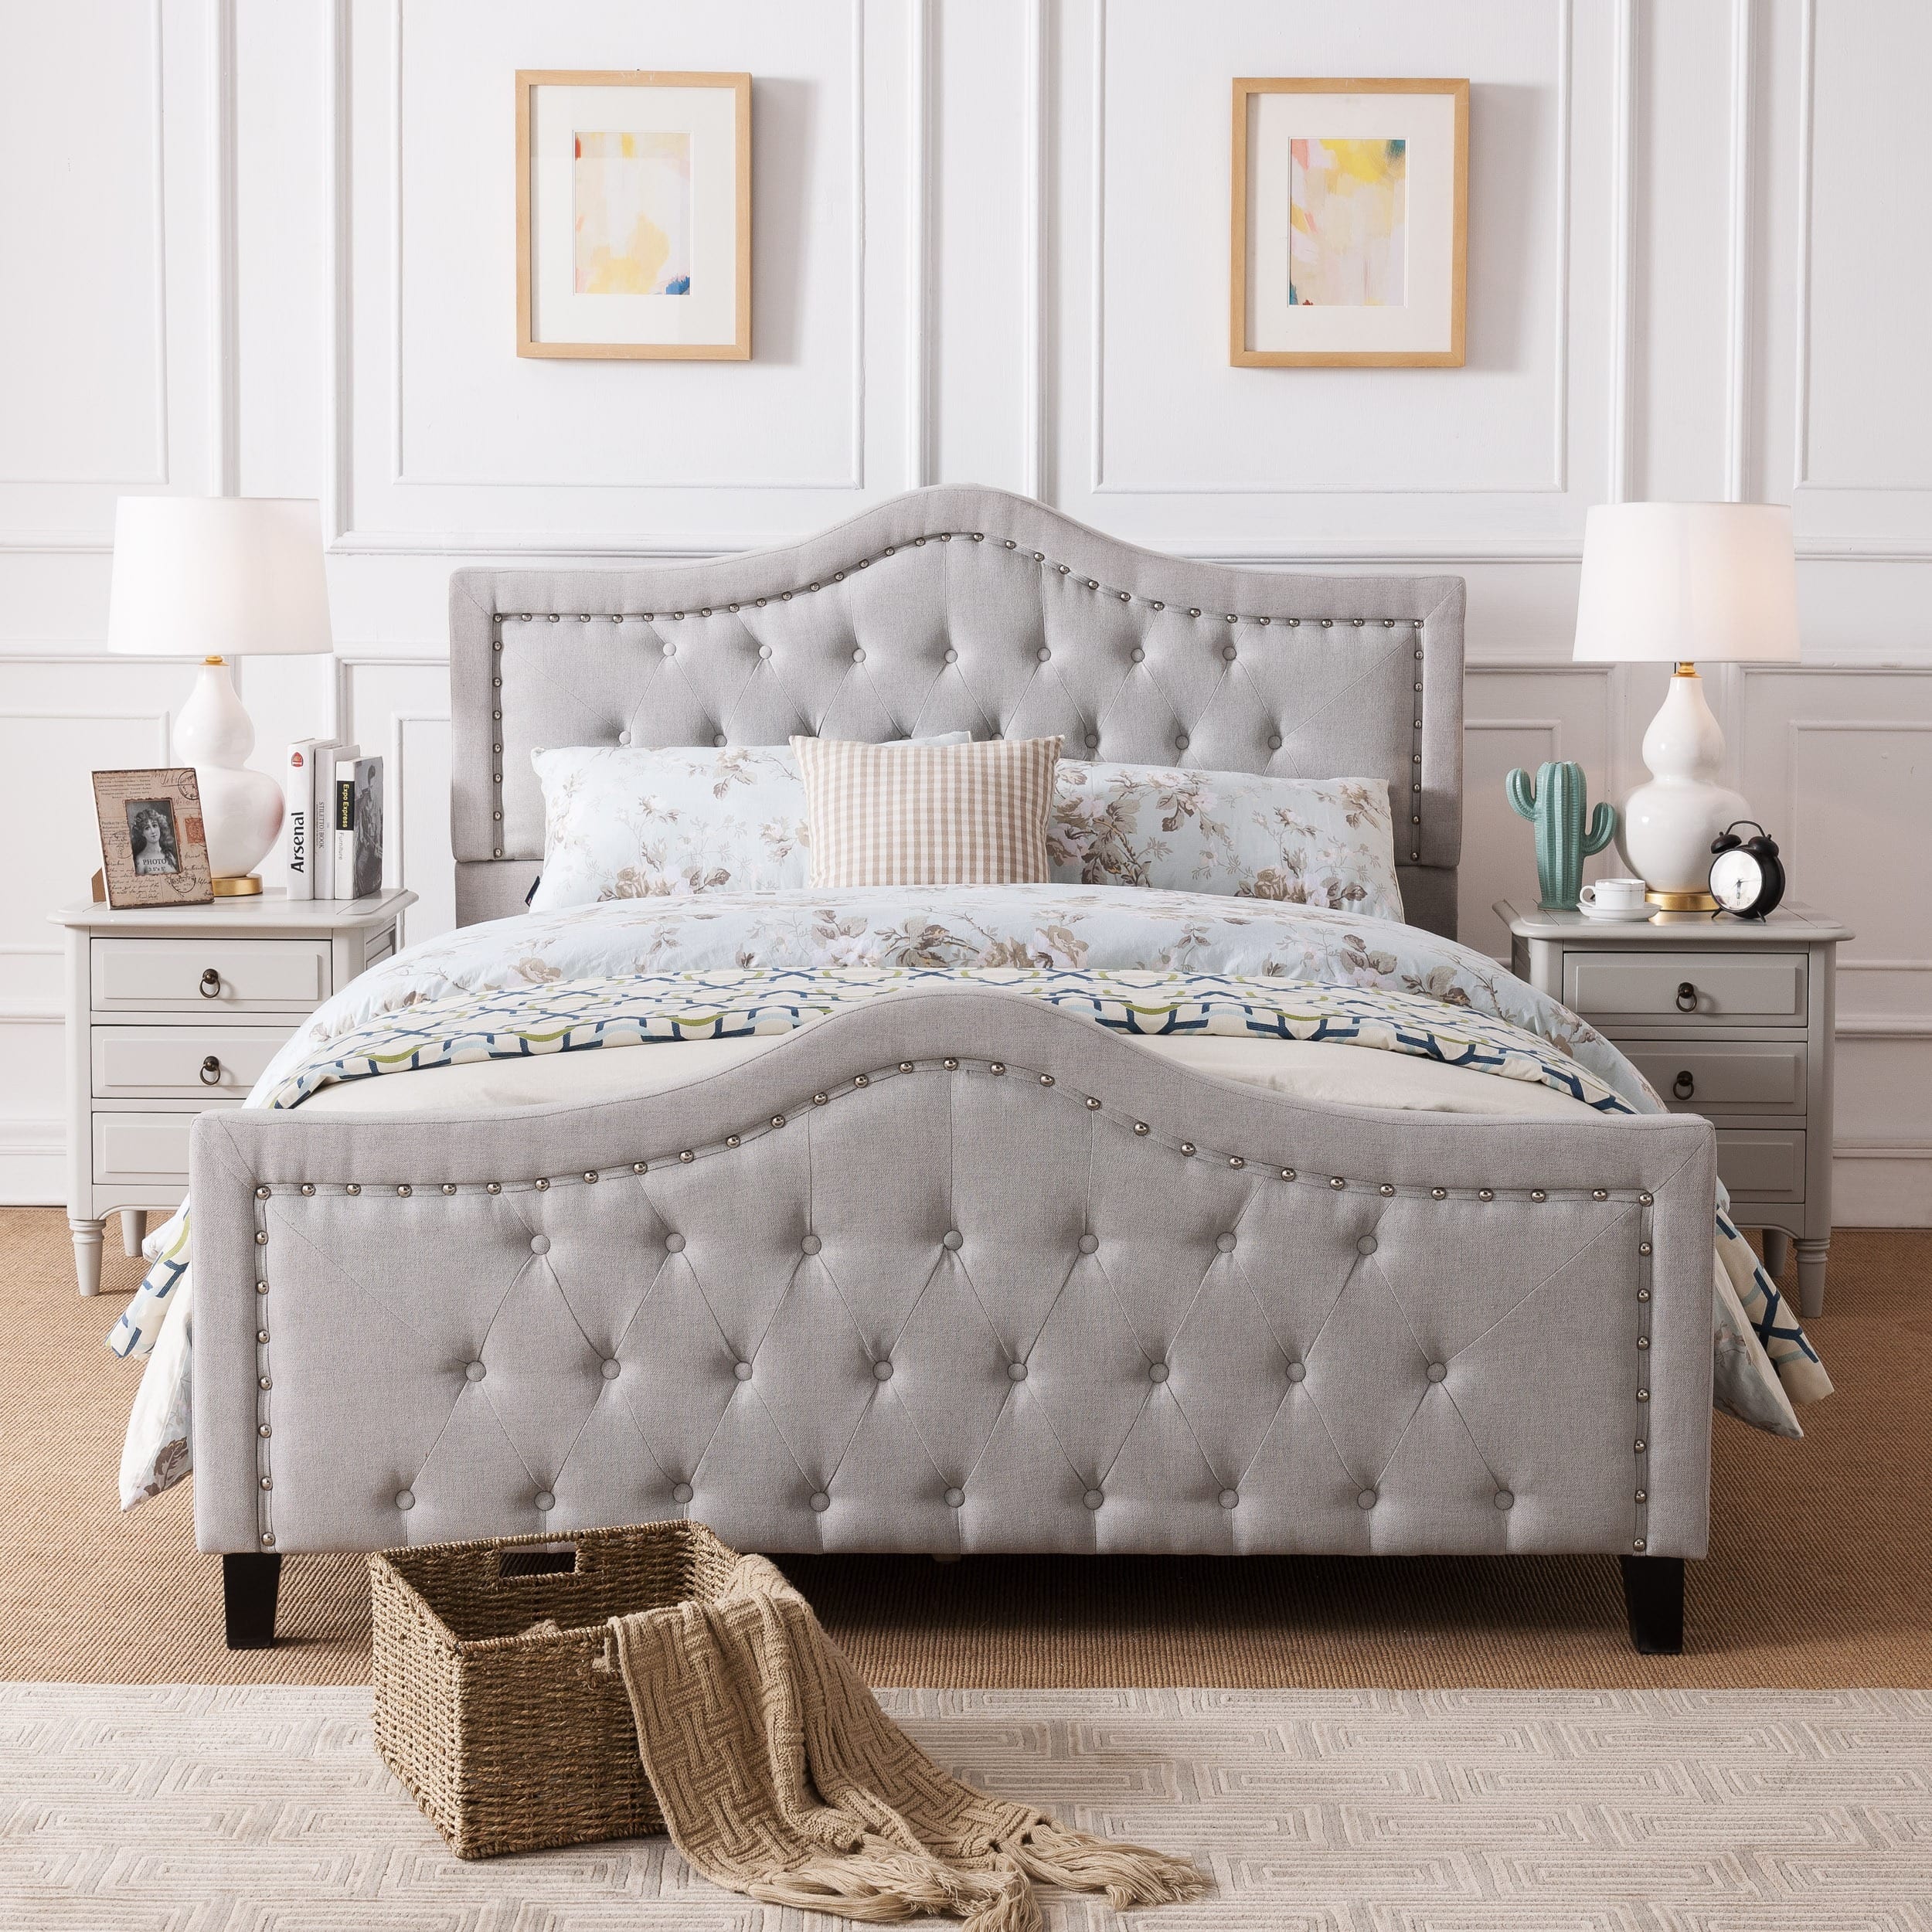 Bedroom Furniture For Less | Overstock